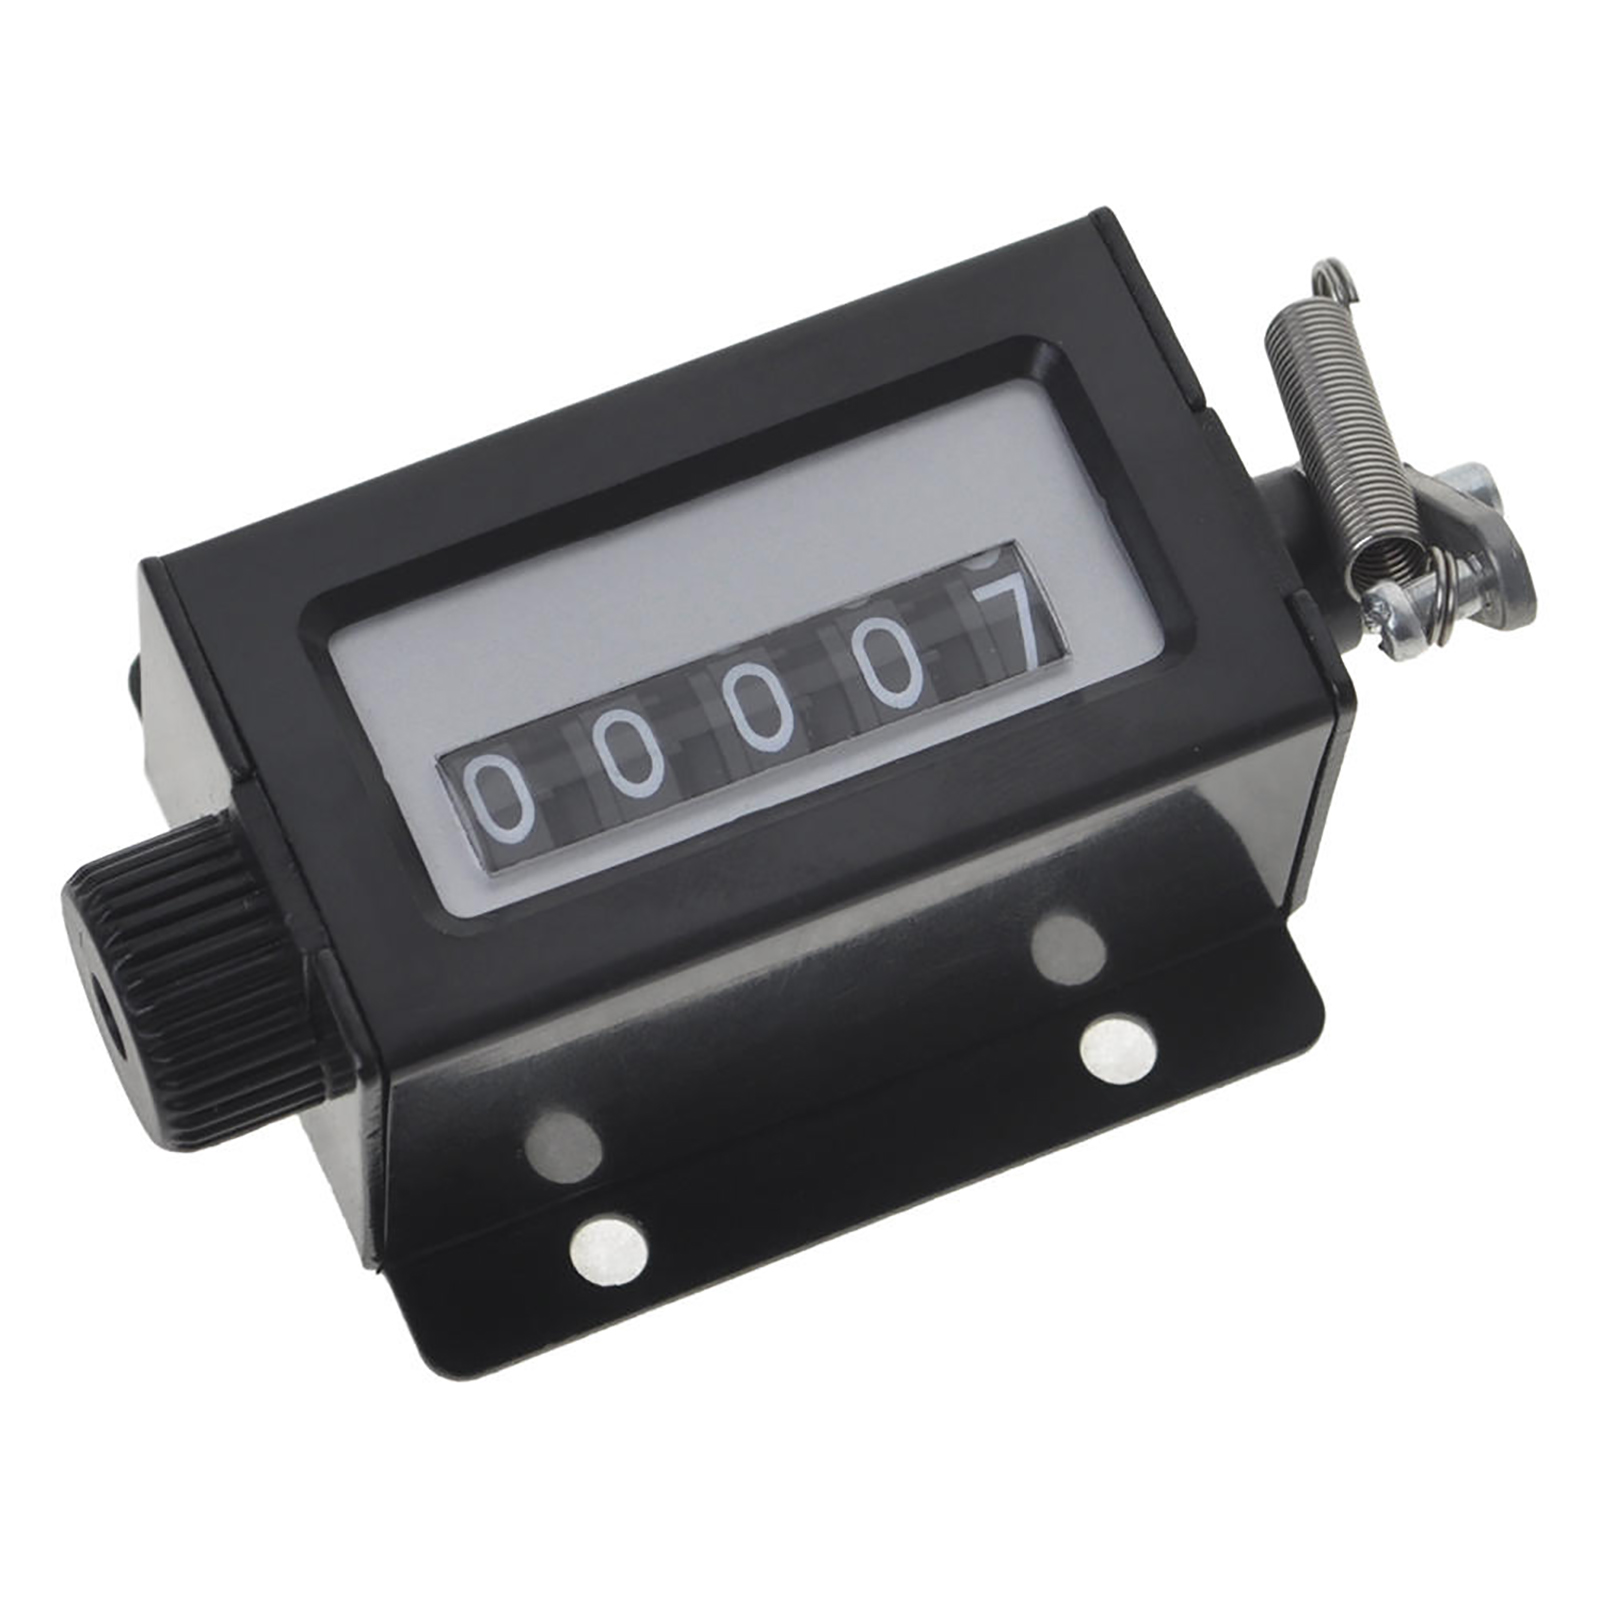 Mechanical 5-Digit Tally Counter Deryang Pull Stroke Tally Counter Counter Mechanical Mechanical Counter 5 Digit Printing Press for Machine Counting Applications 